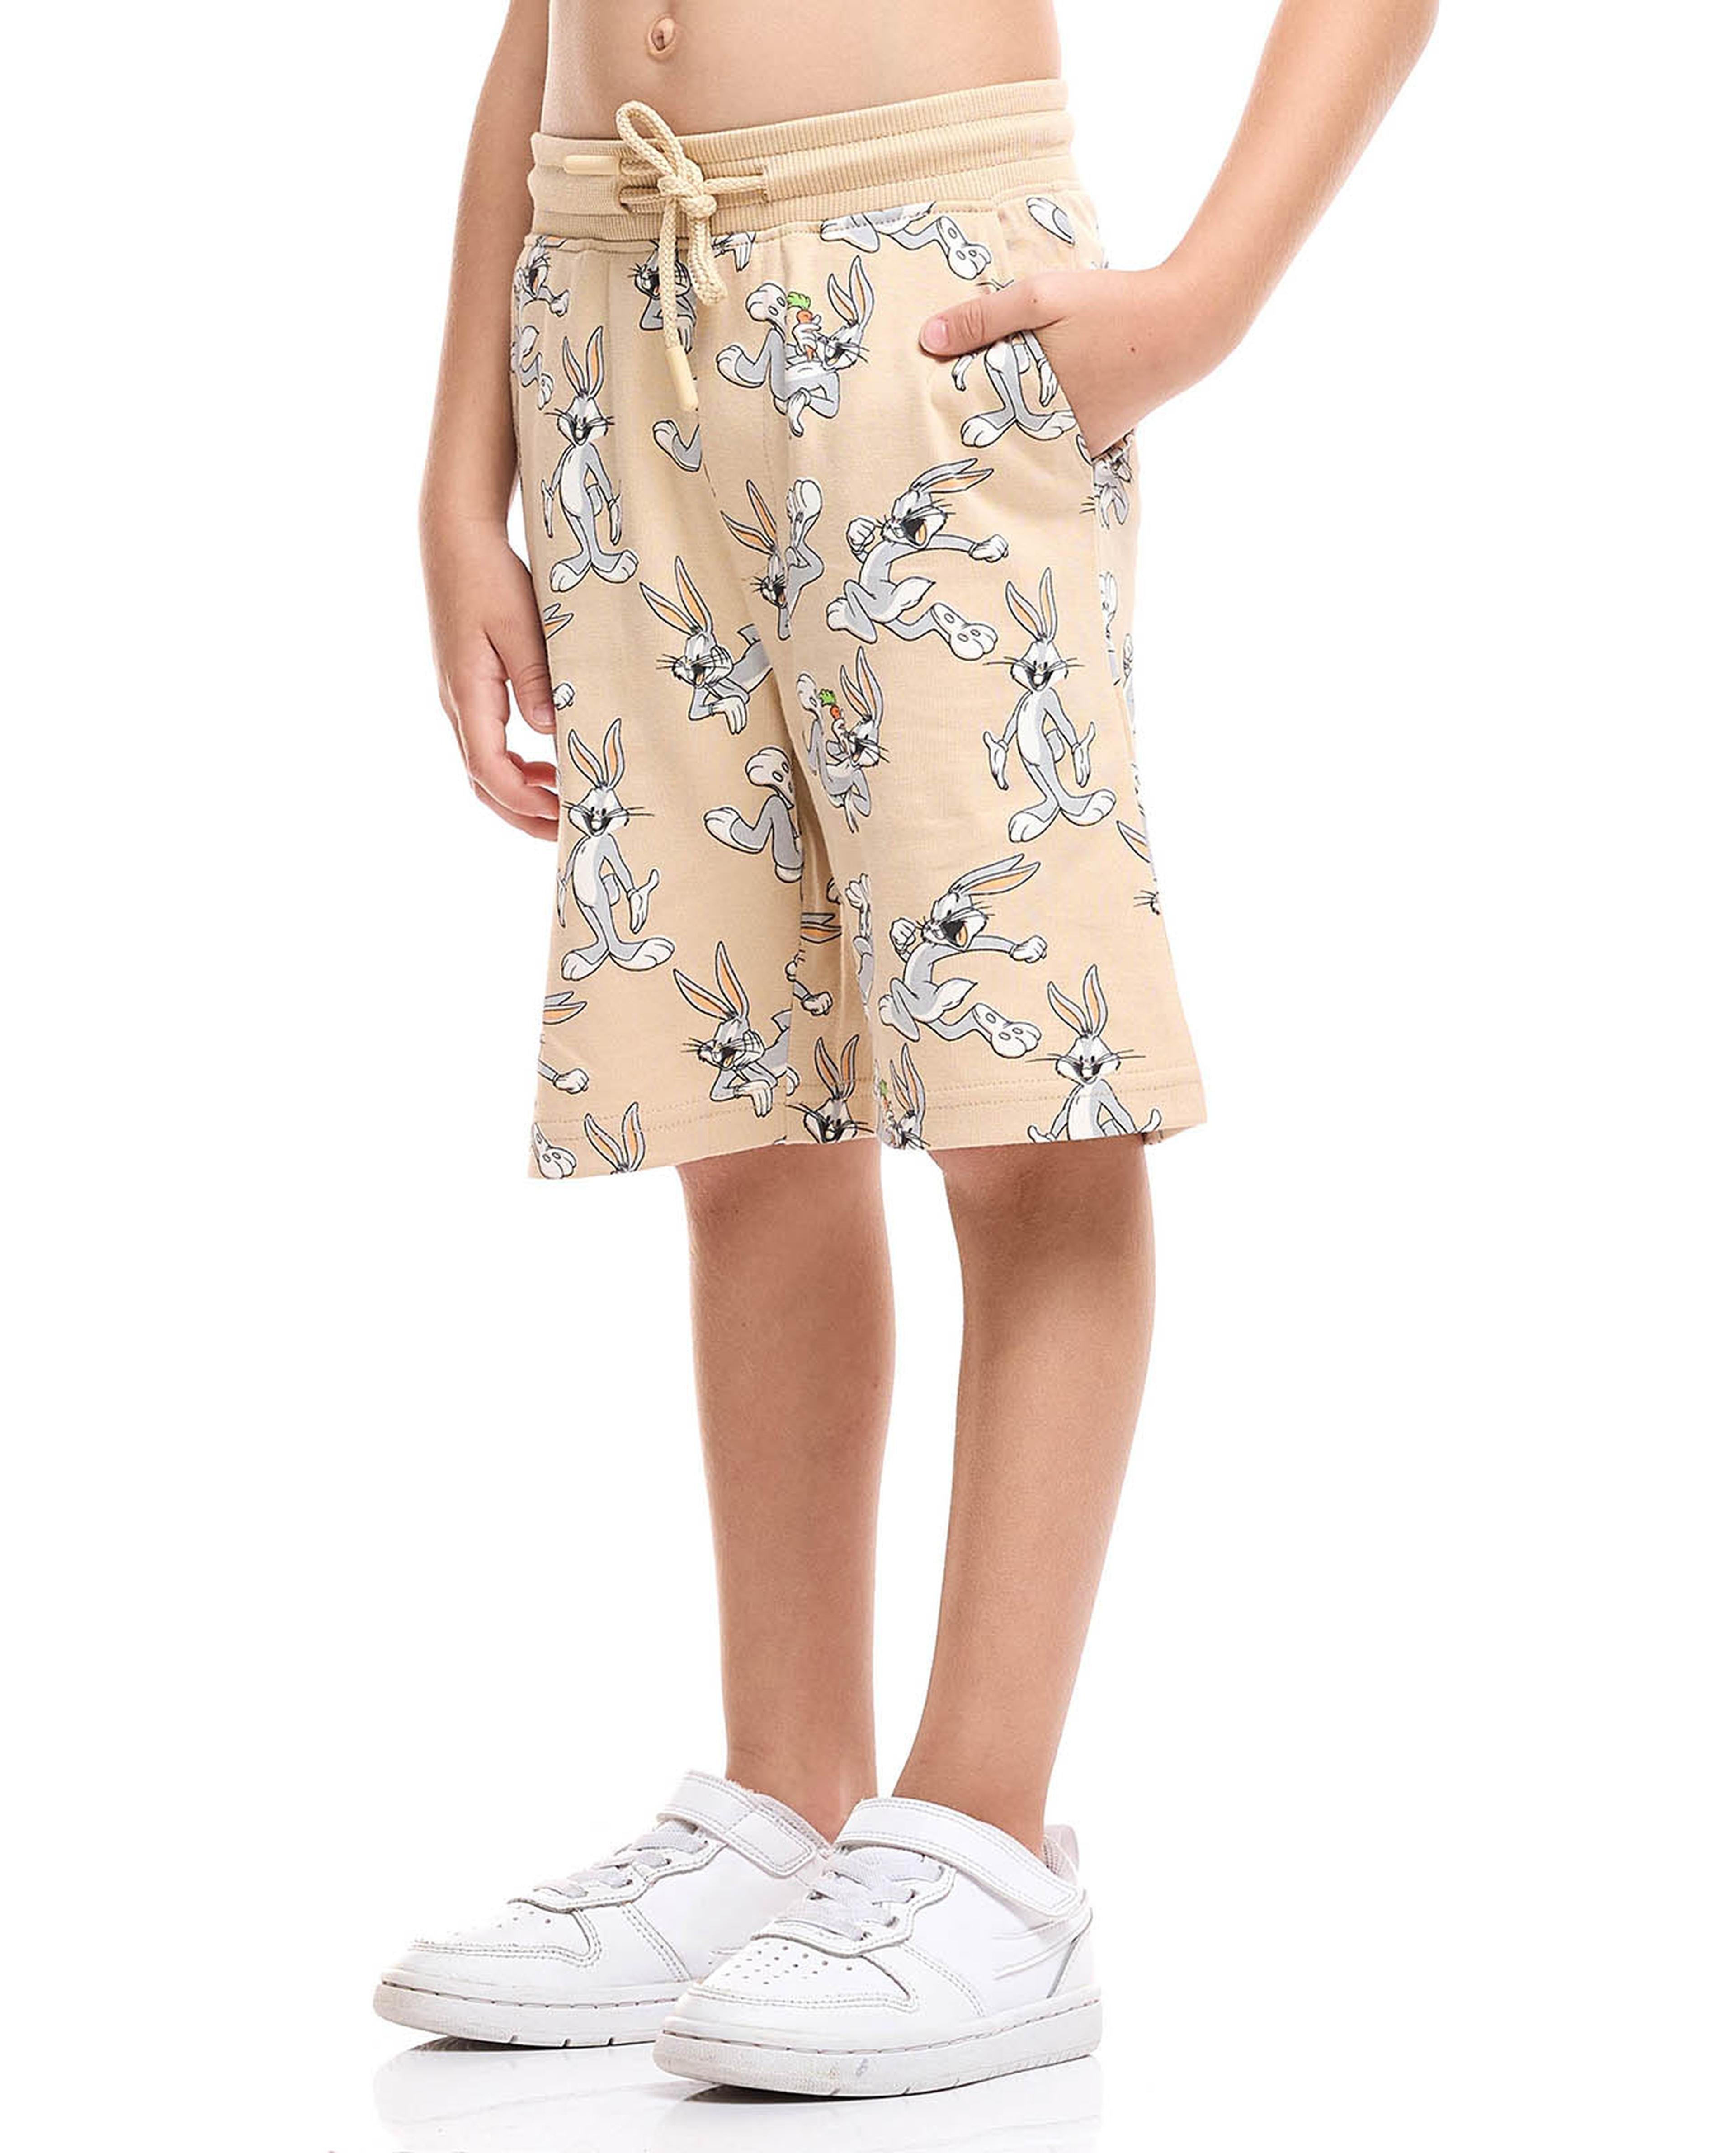 2 Pack Bugs Bunny Print Shorts with Drawstring Waist